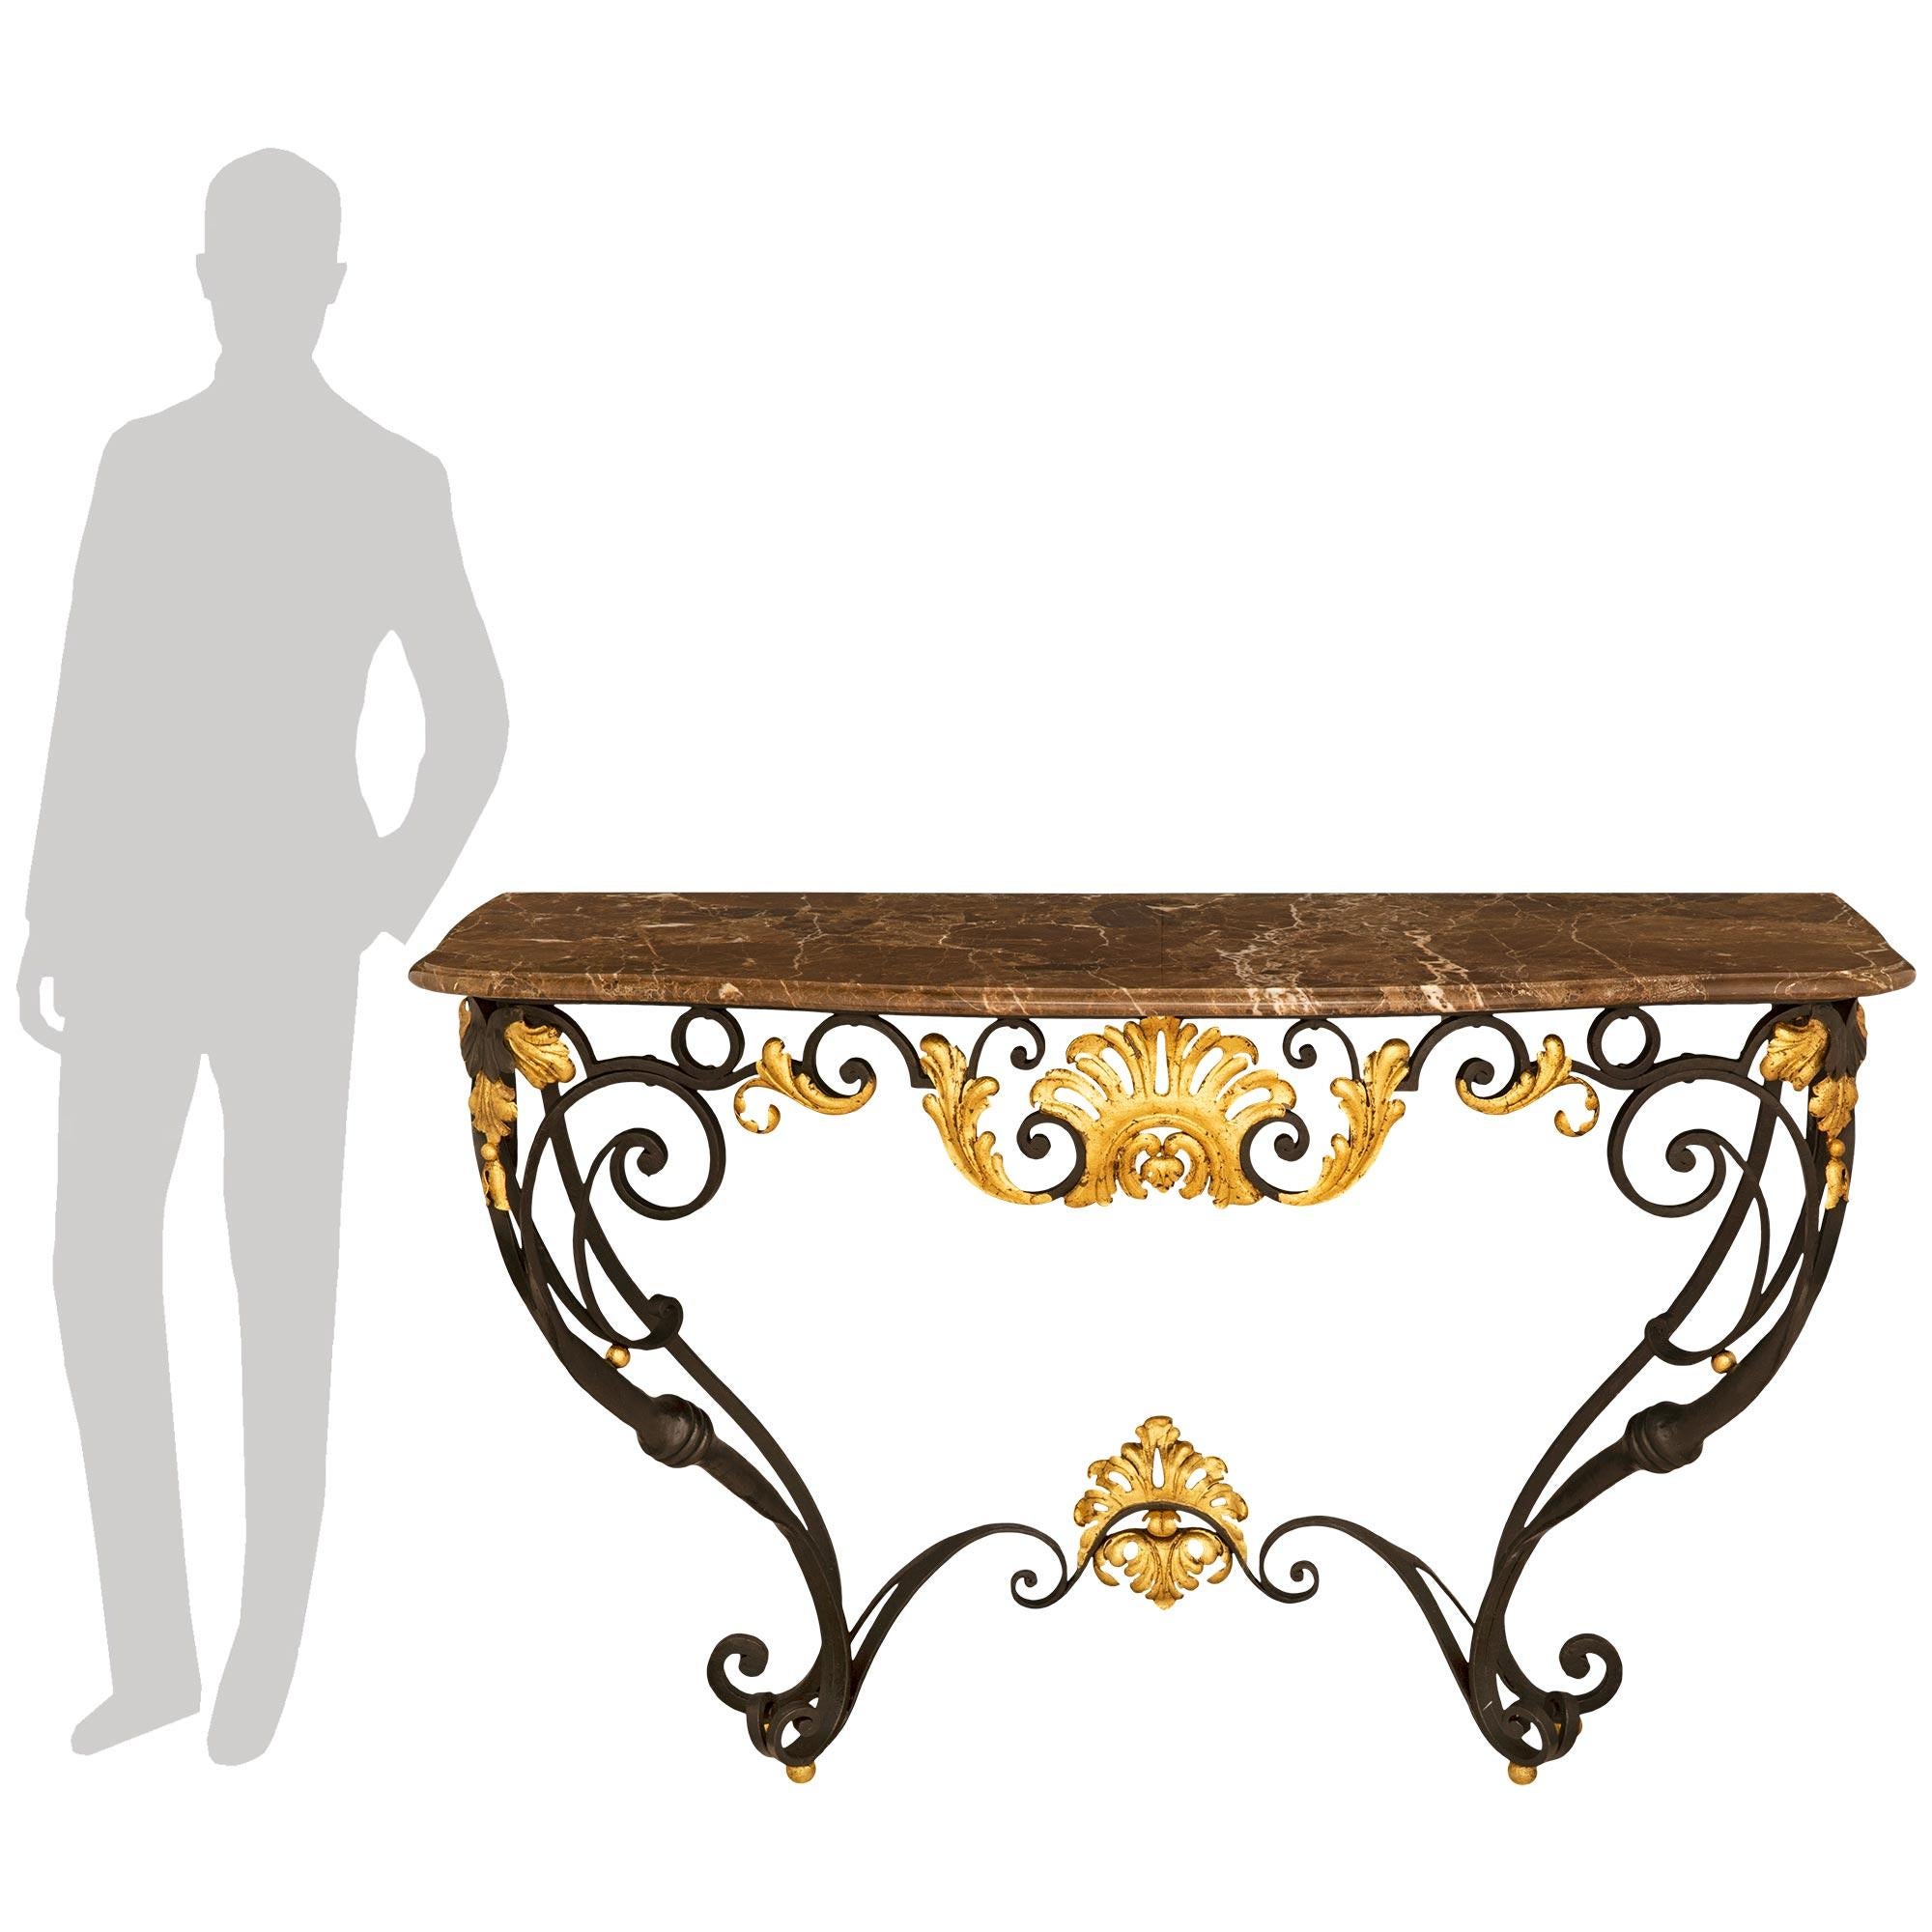 



A handsome French late 19th century Louis XV st. wrought iron, gilt metal and marble console. The console is raised by scrolled legs above the gilt ball feet and joined by a scrolled stretcher displaying a central gilt reserve. Continuing up